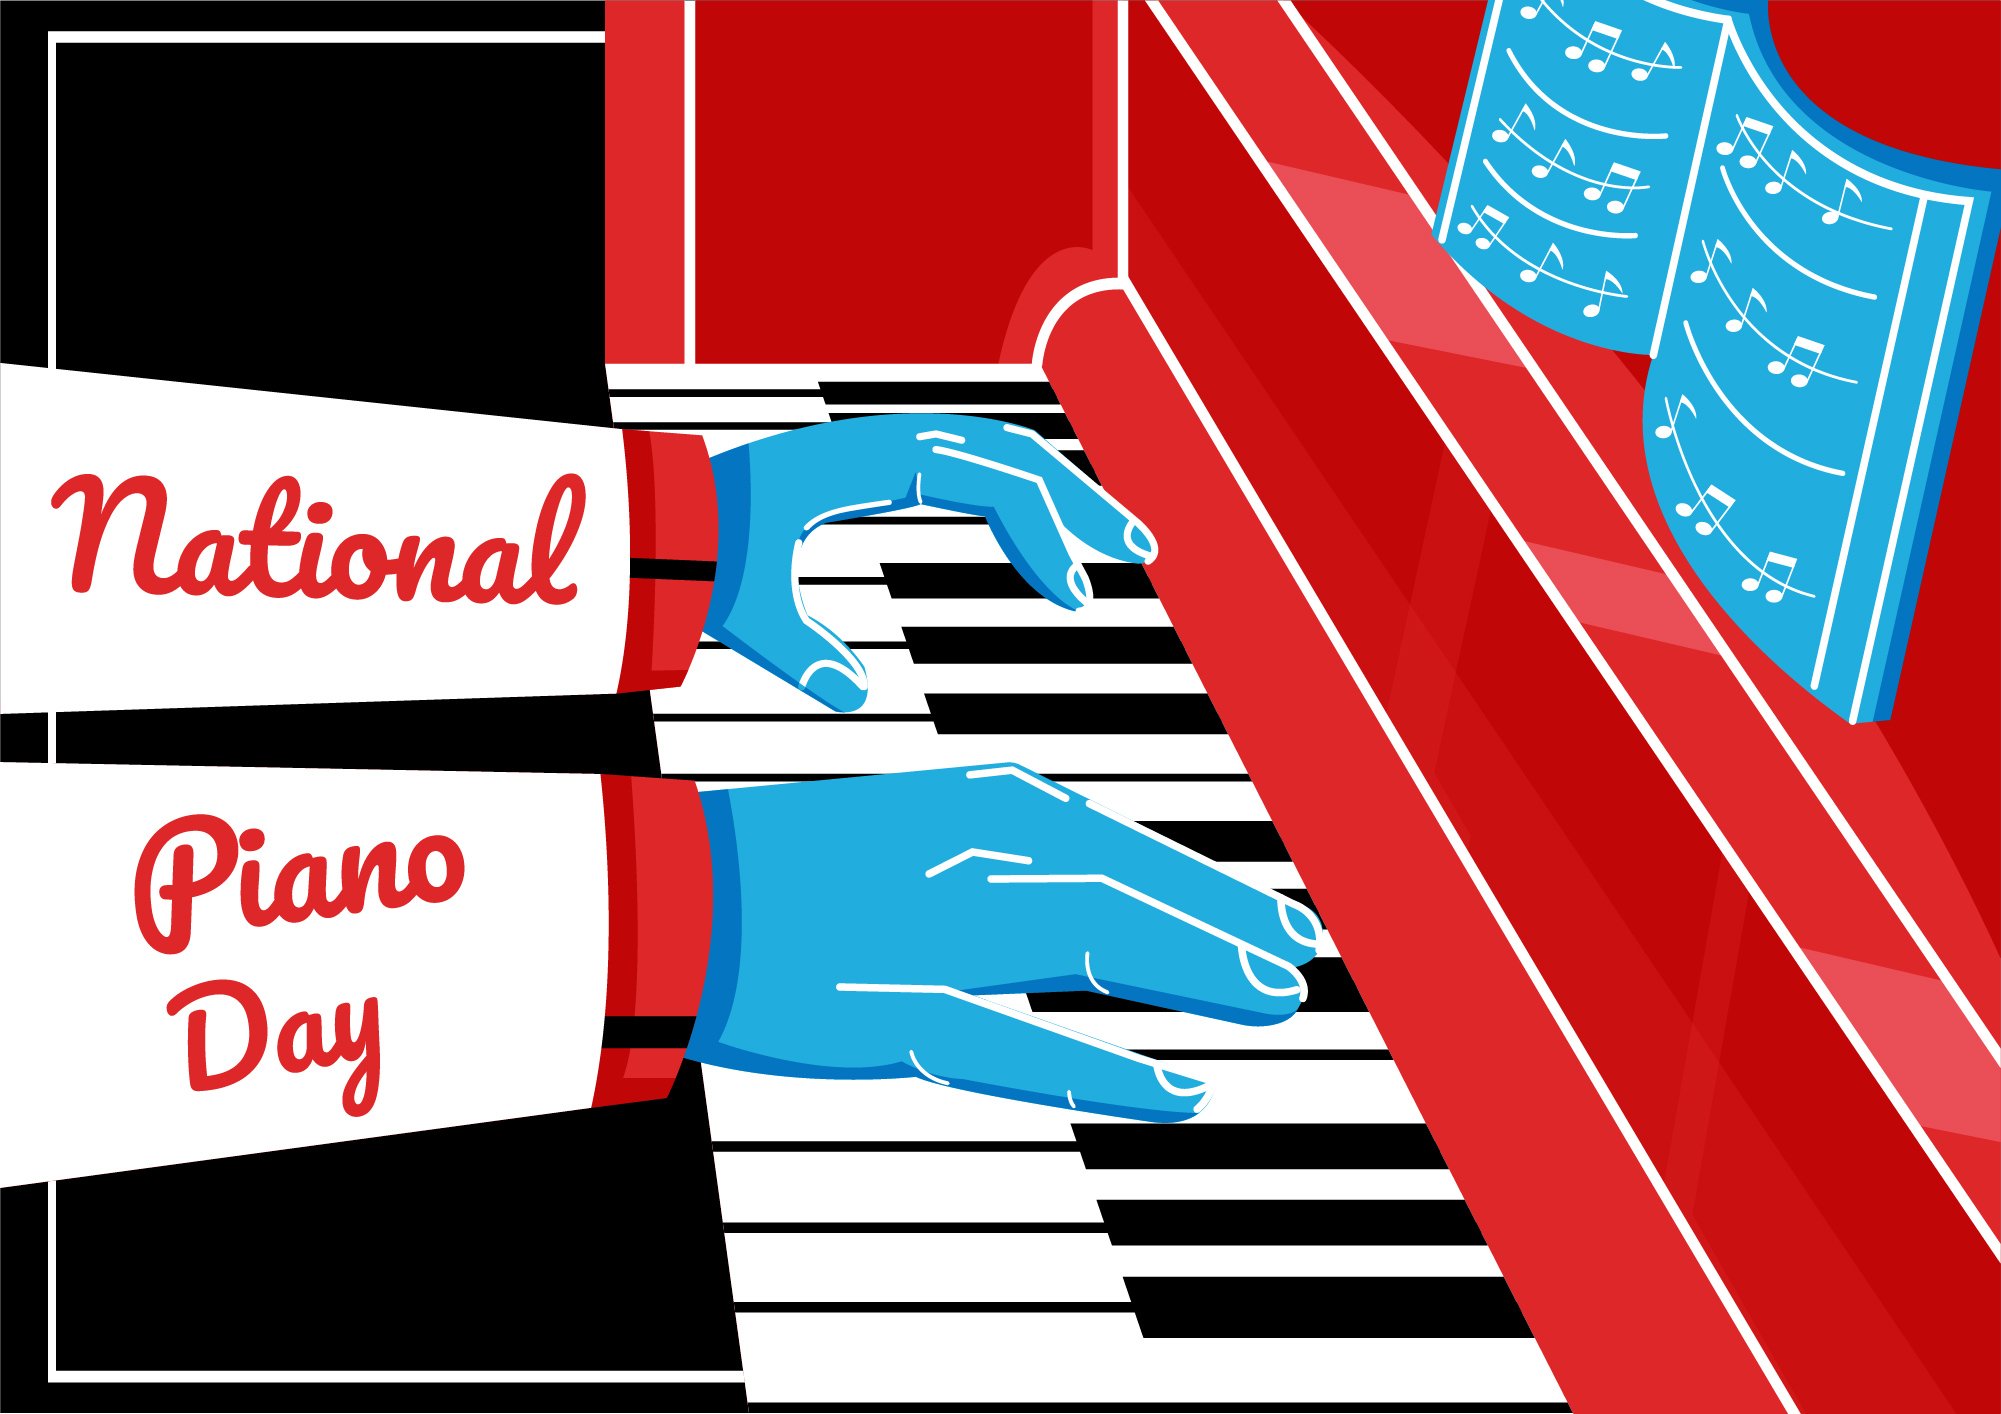 National Piano Day preview image.